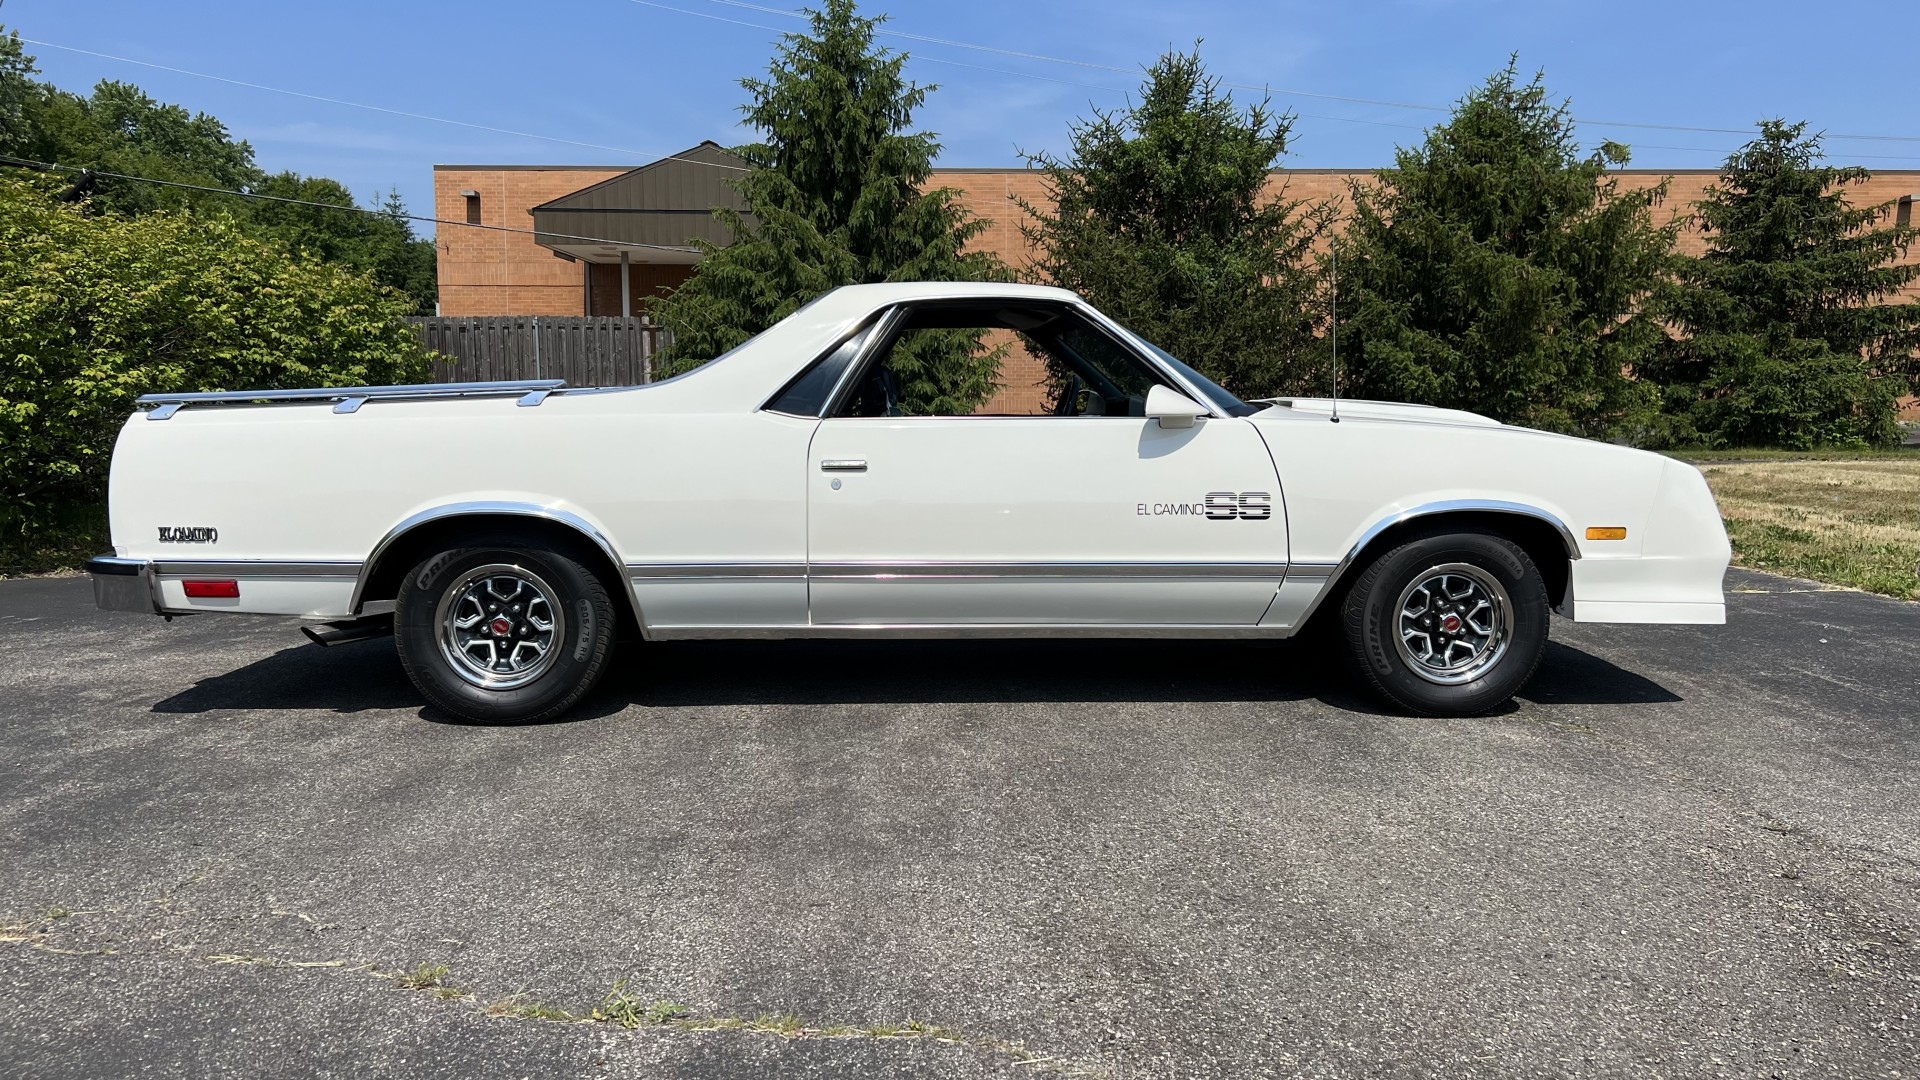 1987 Chevy El Camino, 383 Stroker, 1 Family Owned, SOLD!